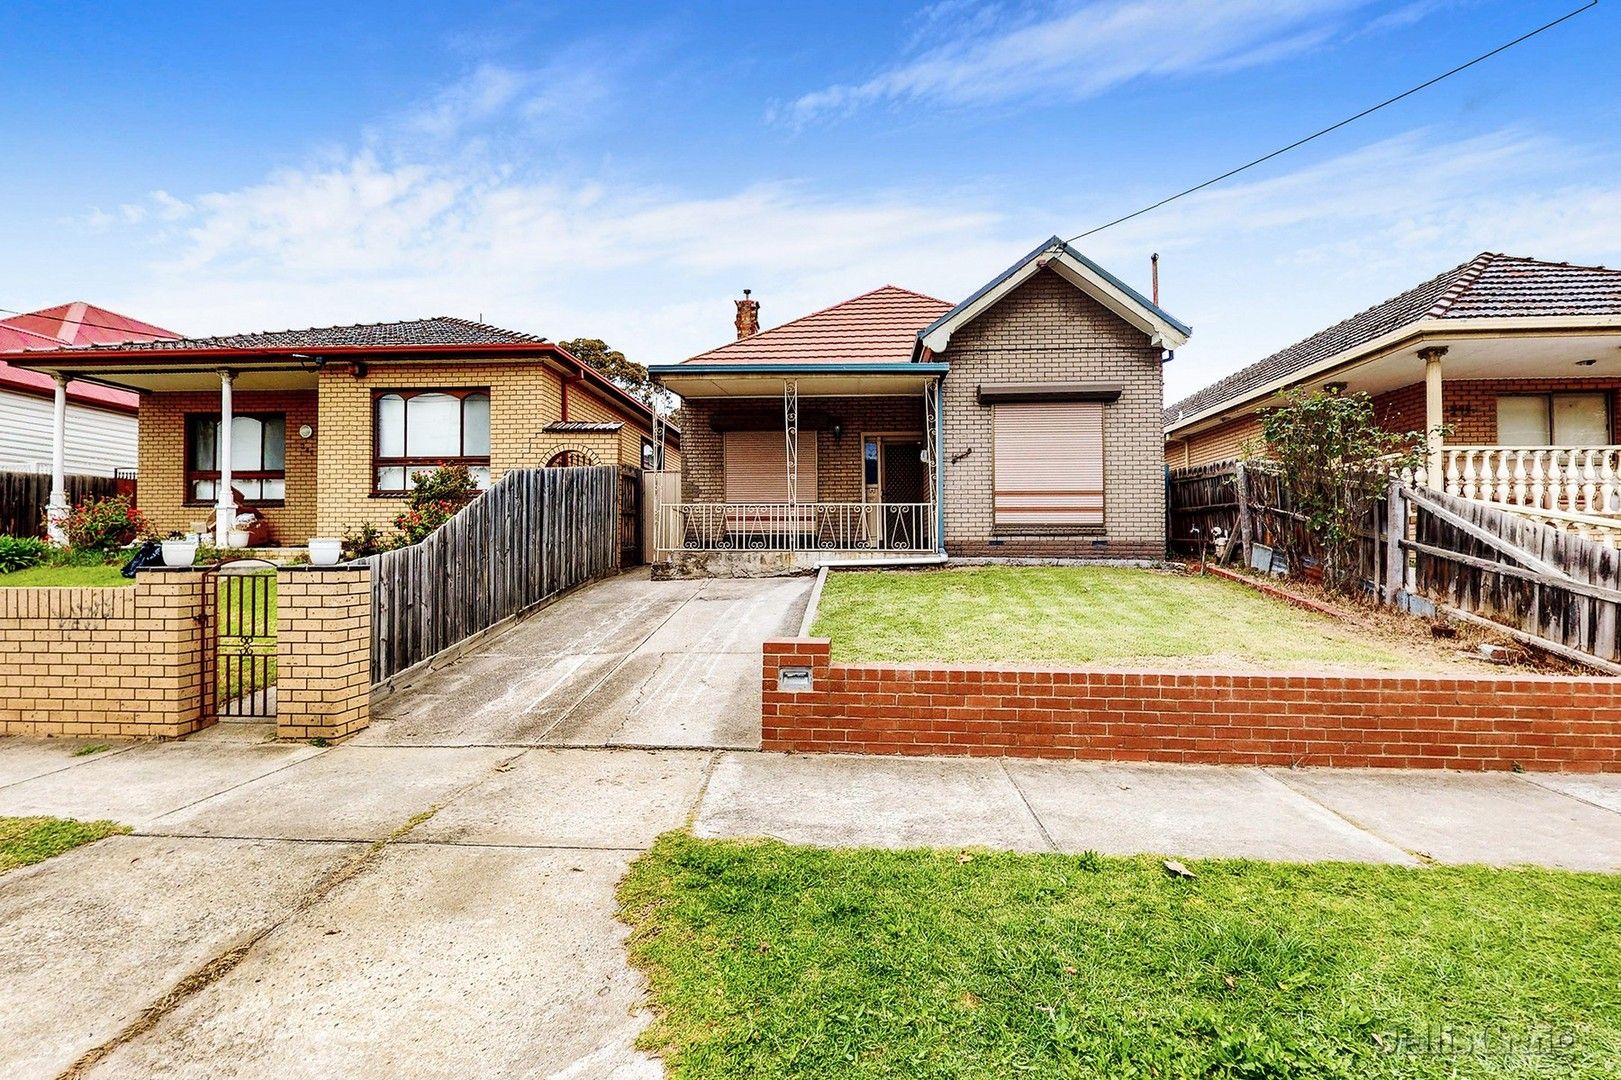 4 bedrooms House in 247 Maribyrnong Road ASCOT VALE VIC, 3032